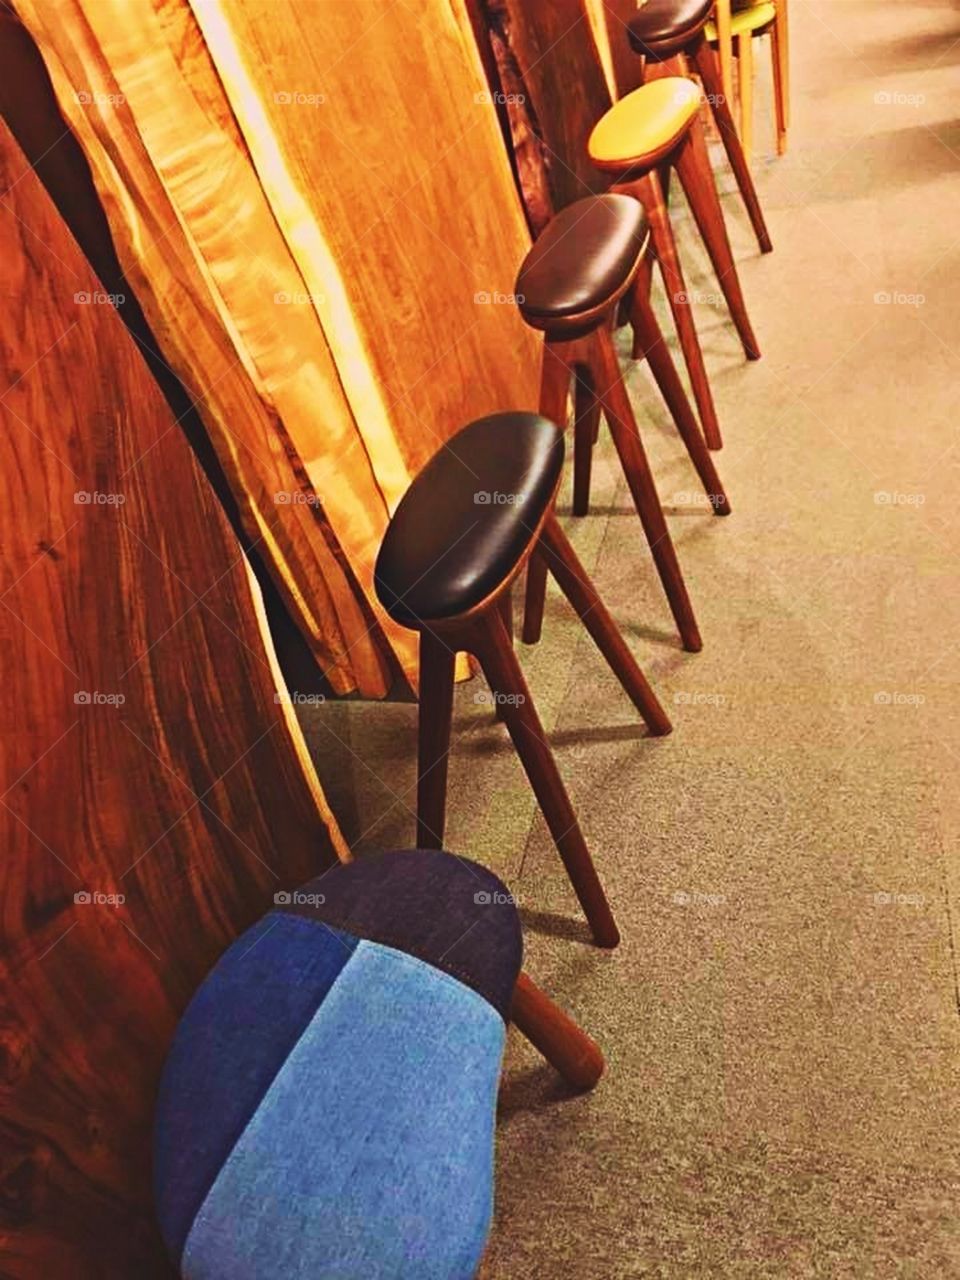 The Stools